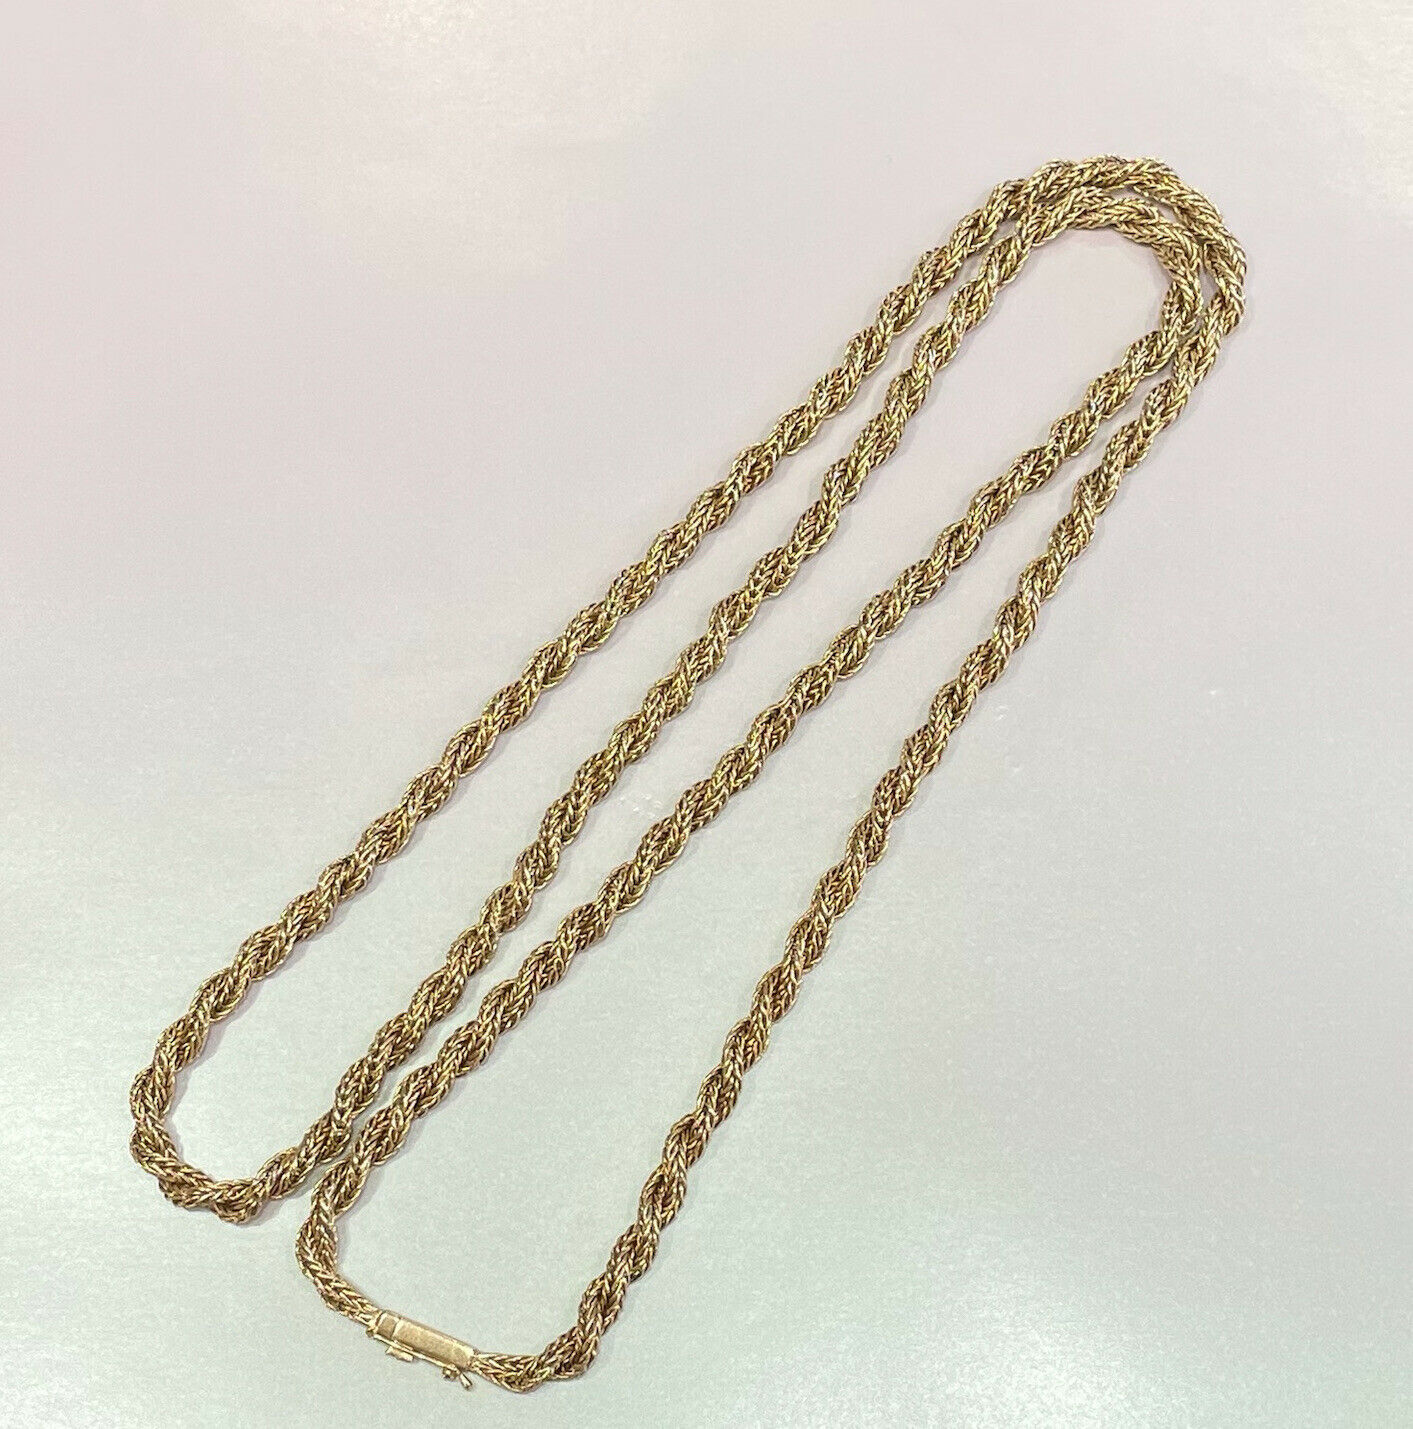 Vintage Bvlgari 18k Yellow Gold Twisted Rope Link Chain Necklace